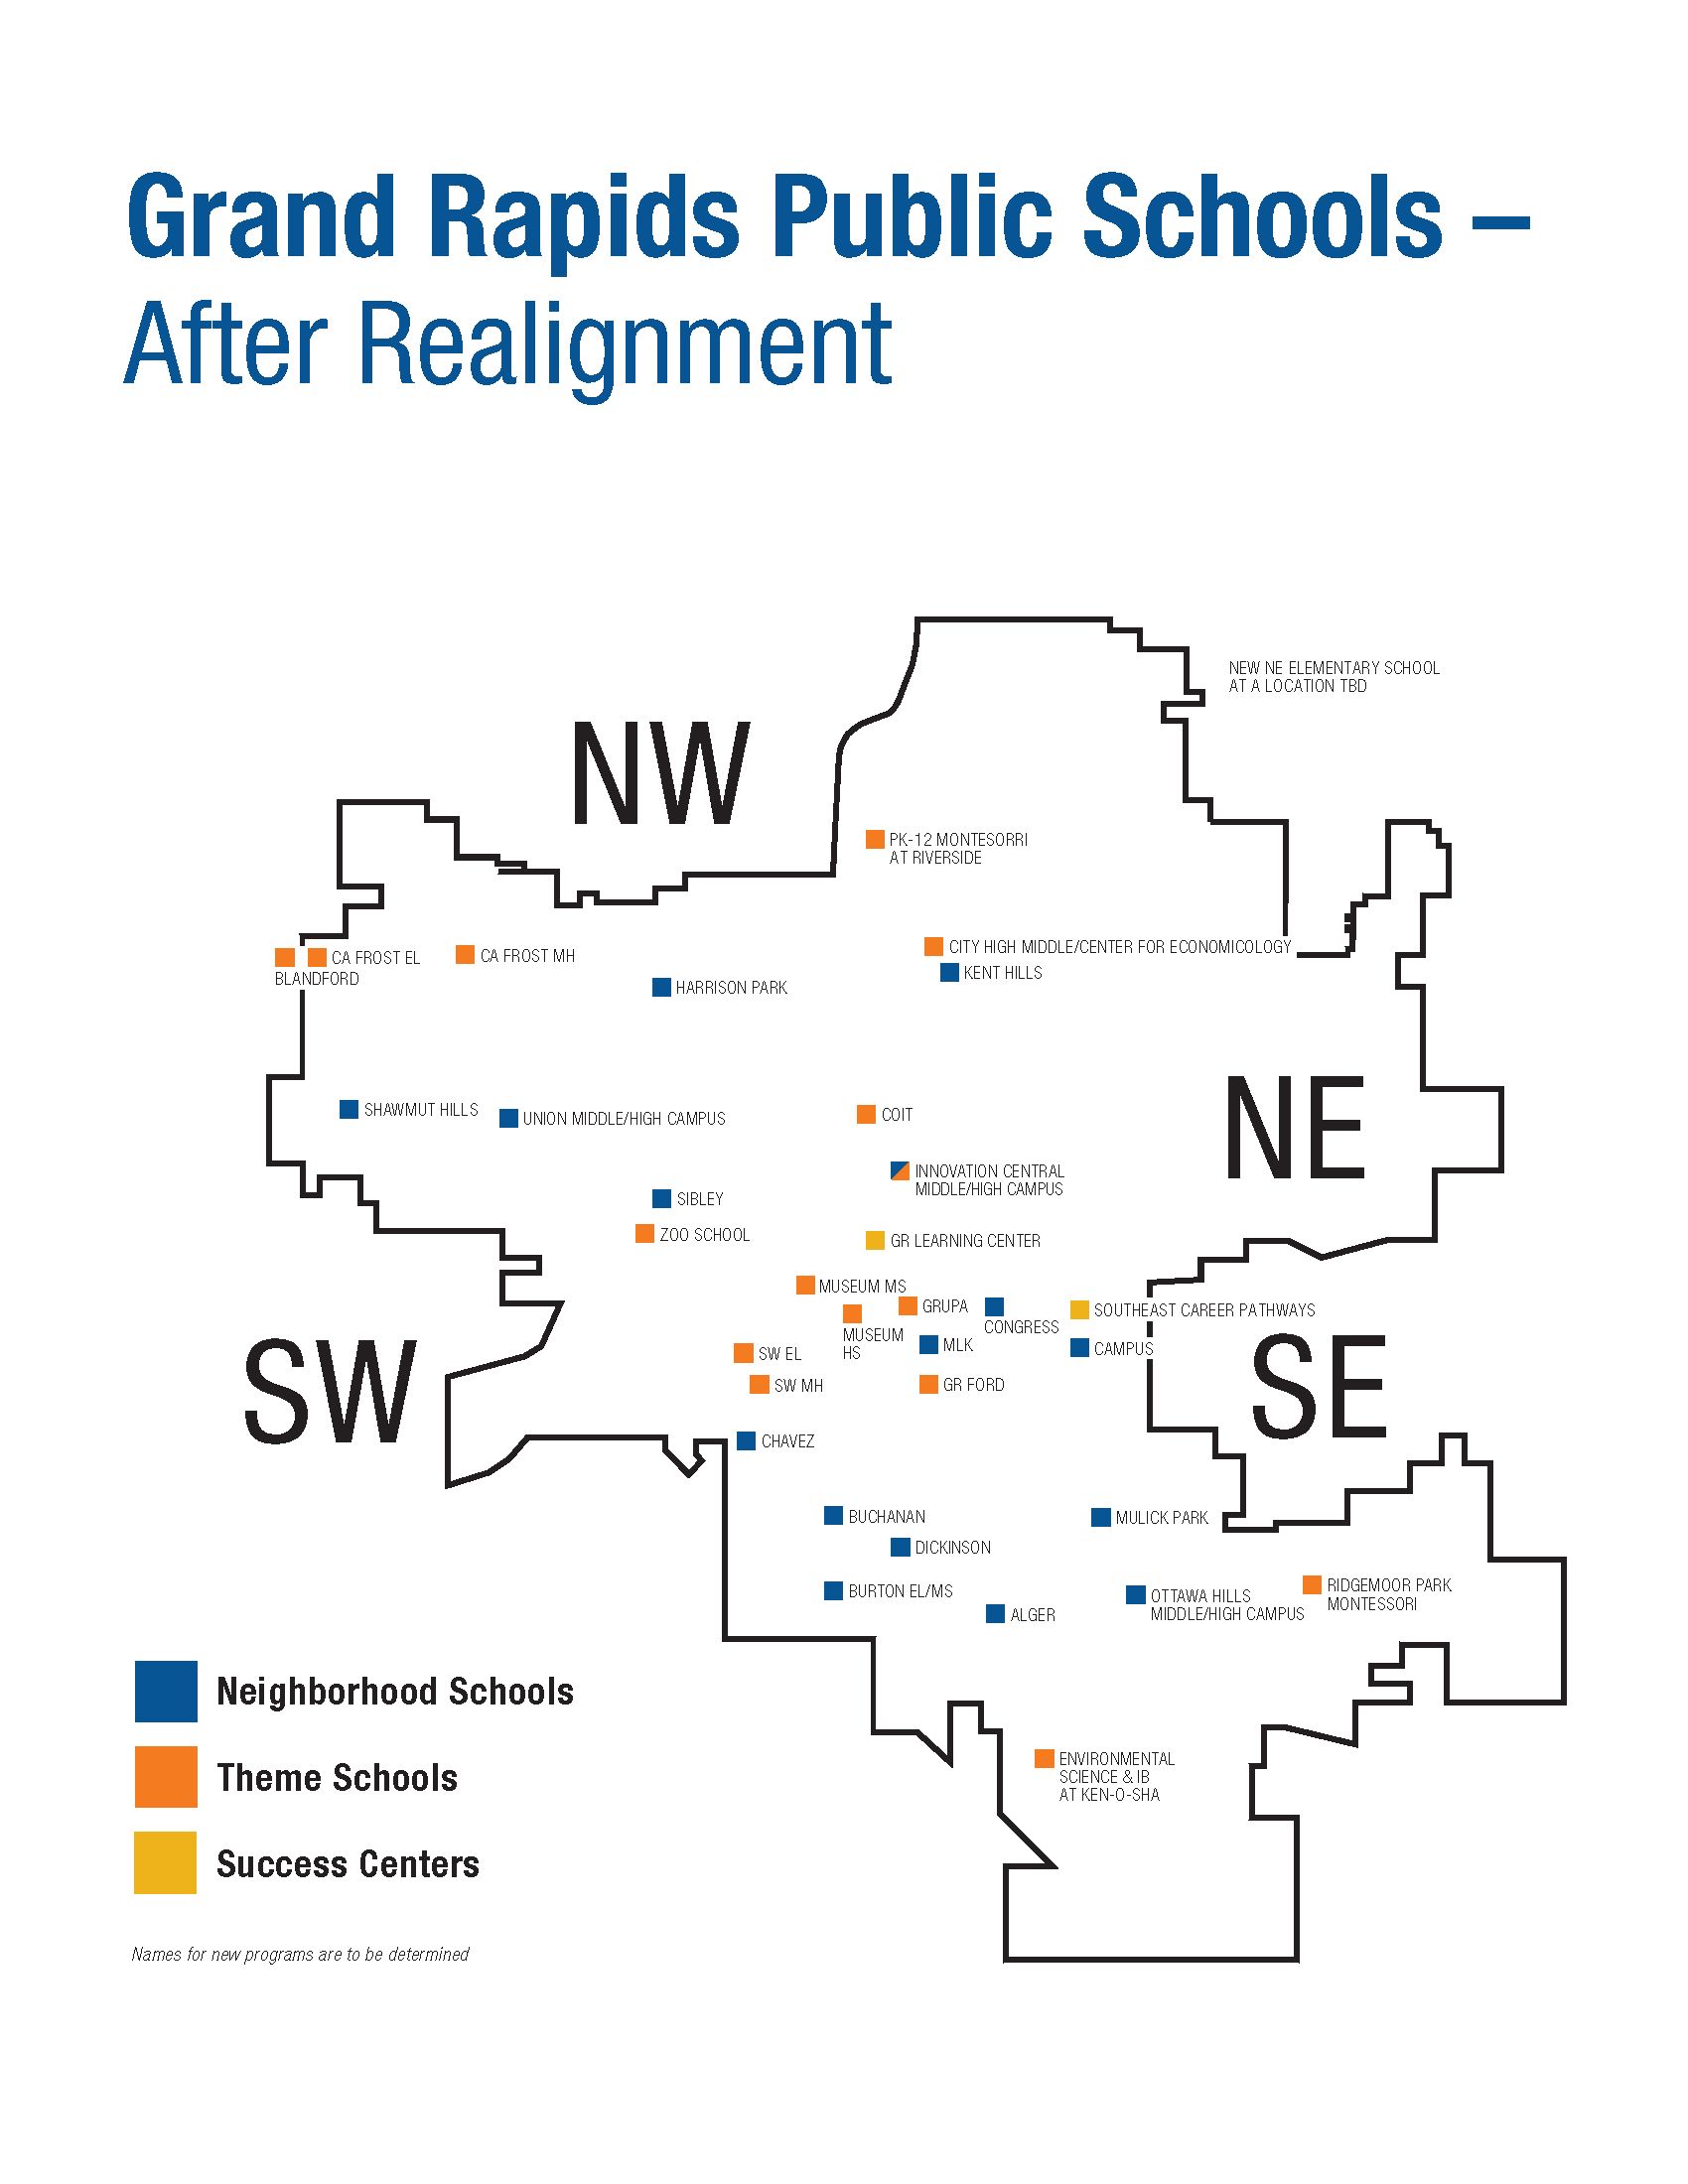 GRPS Quadrant Map - After Realignment